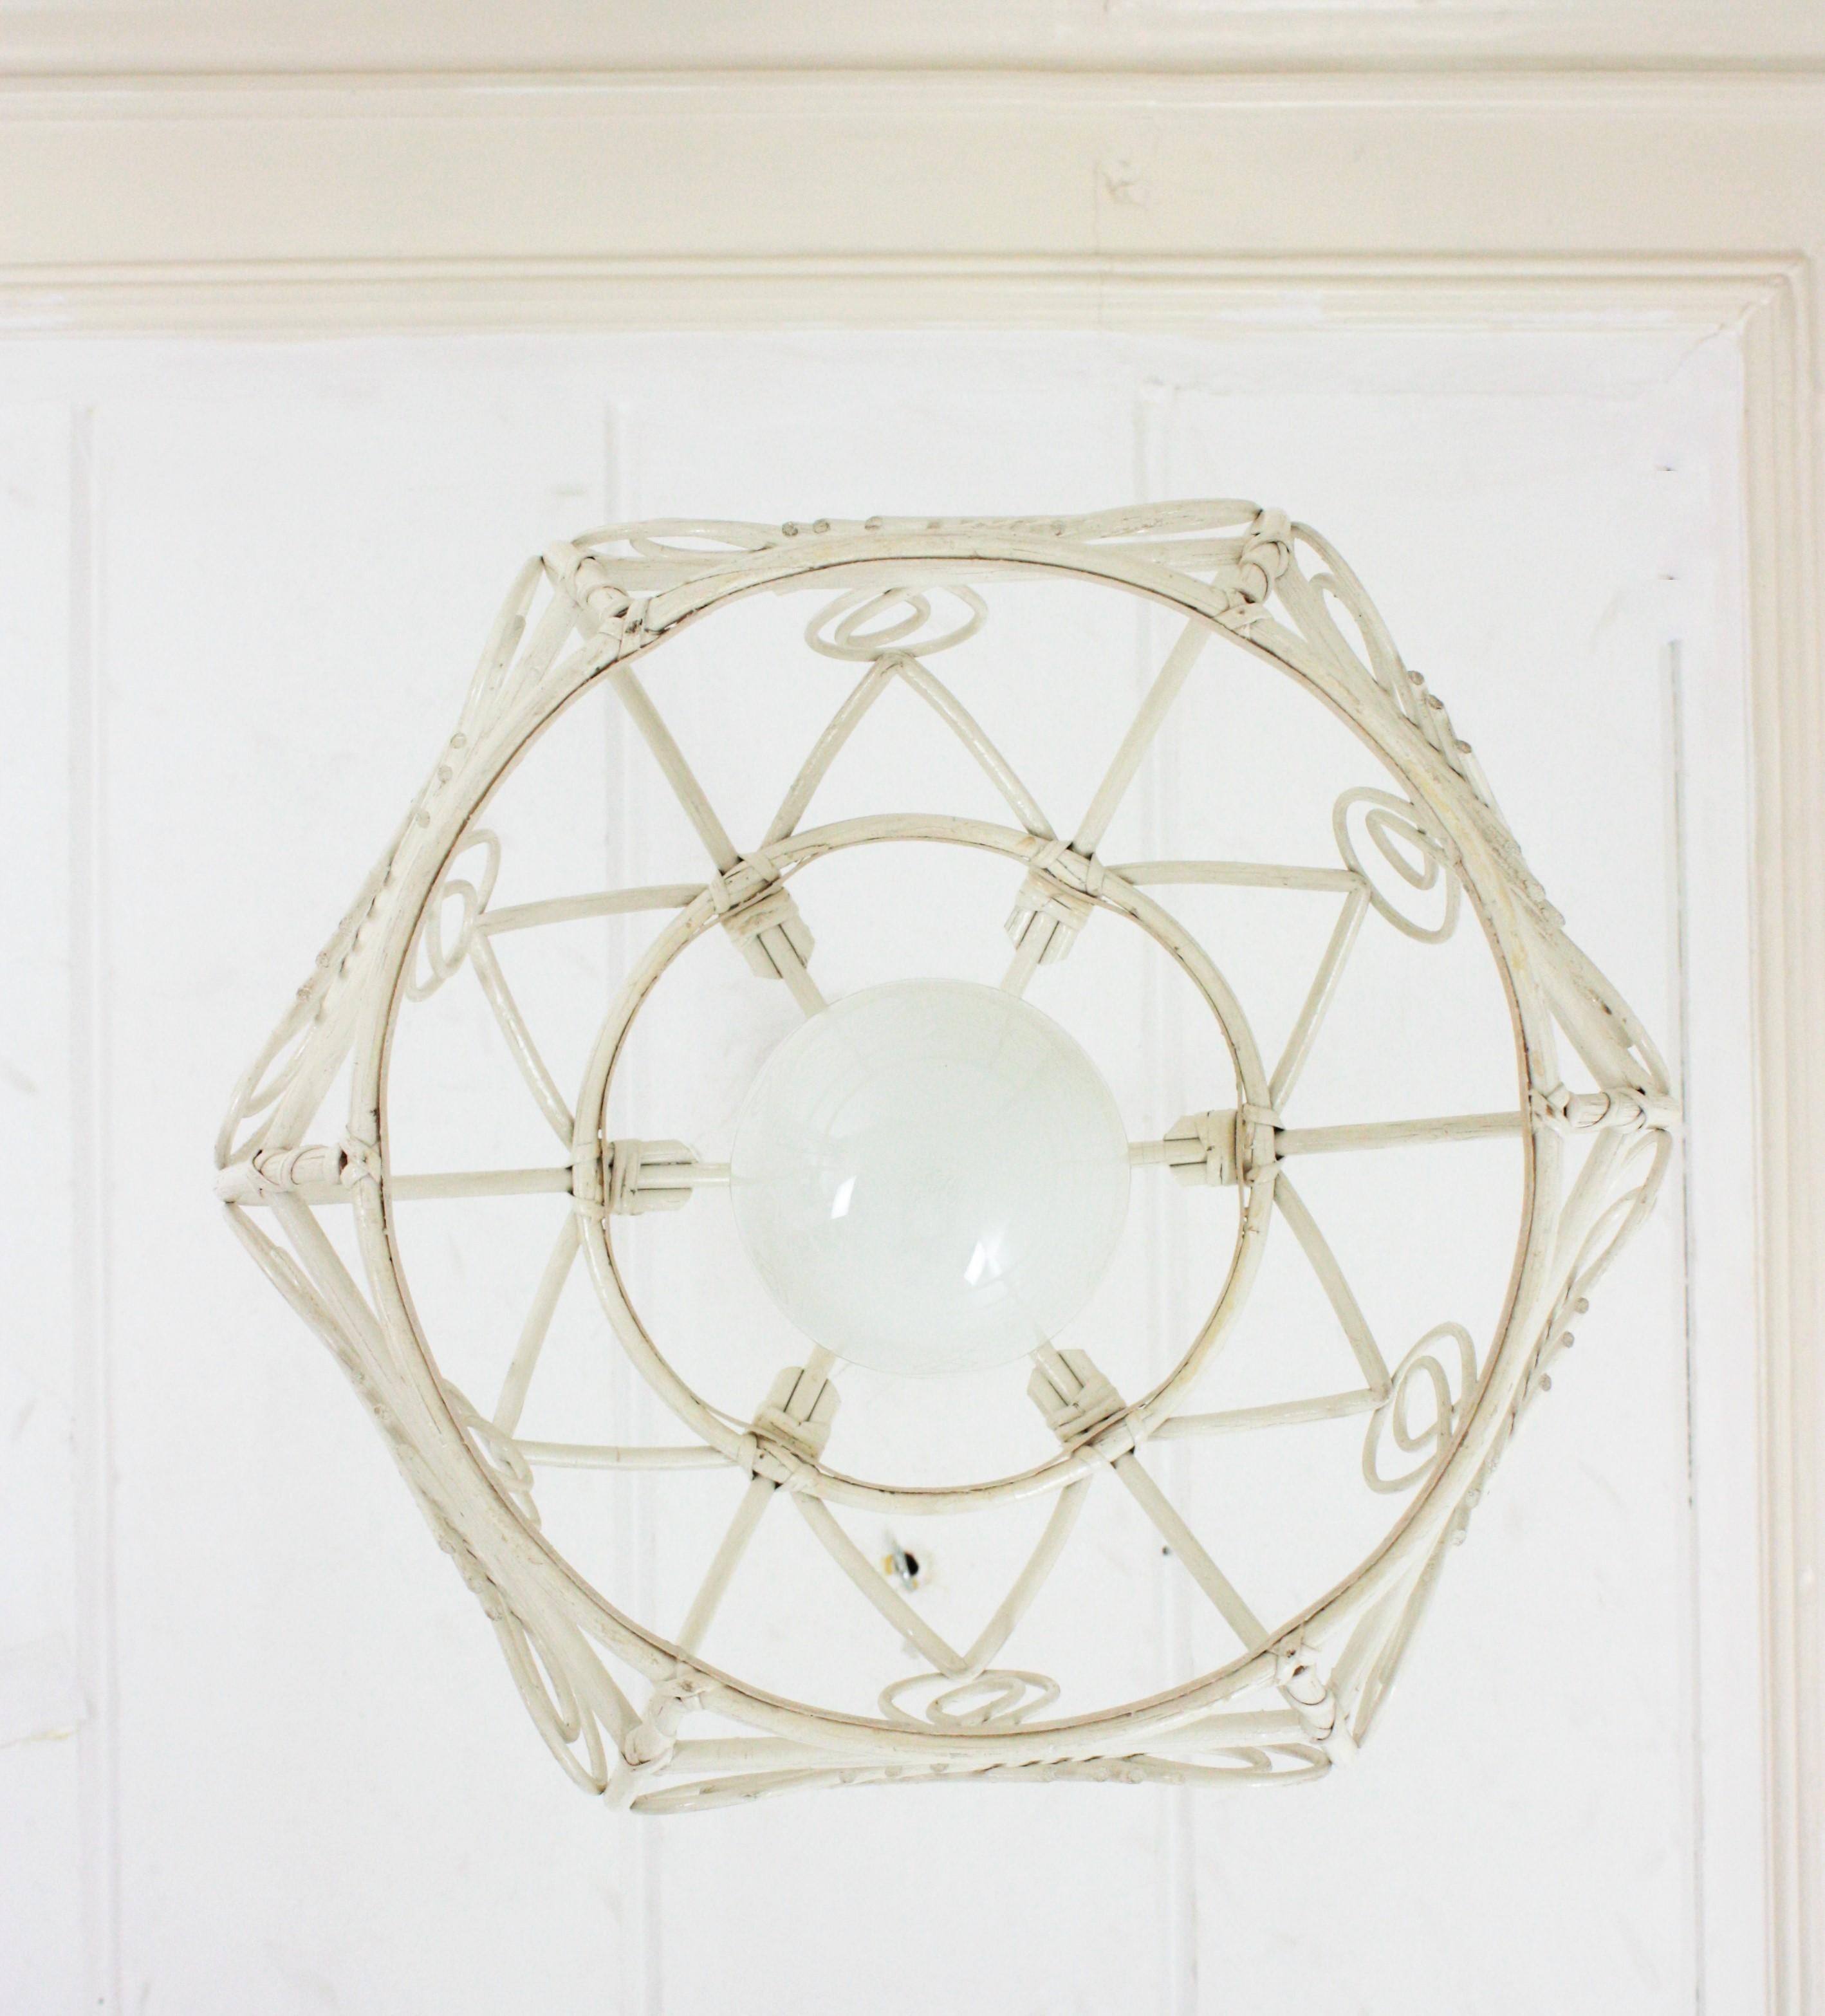 French Rattan Bell Pendant Lamp / Lantern in White Patina, 1960s For Sale 4